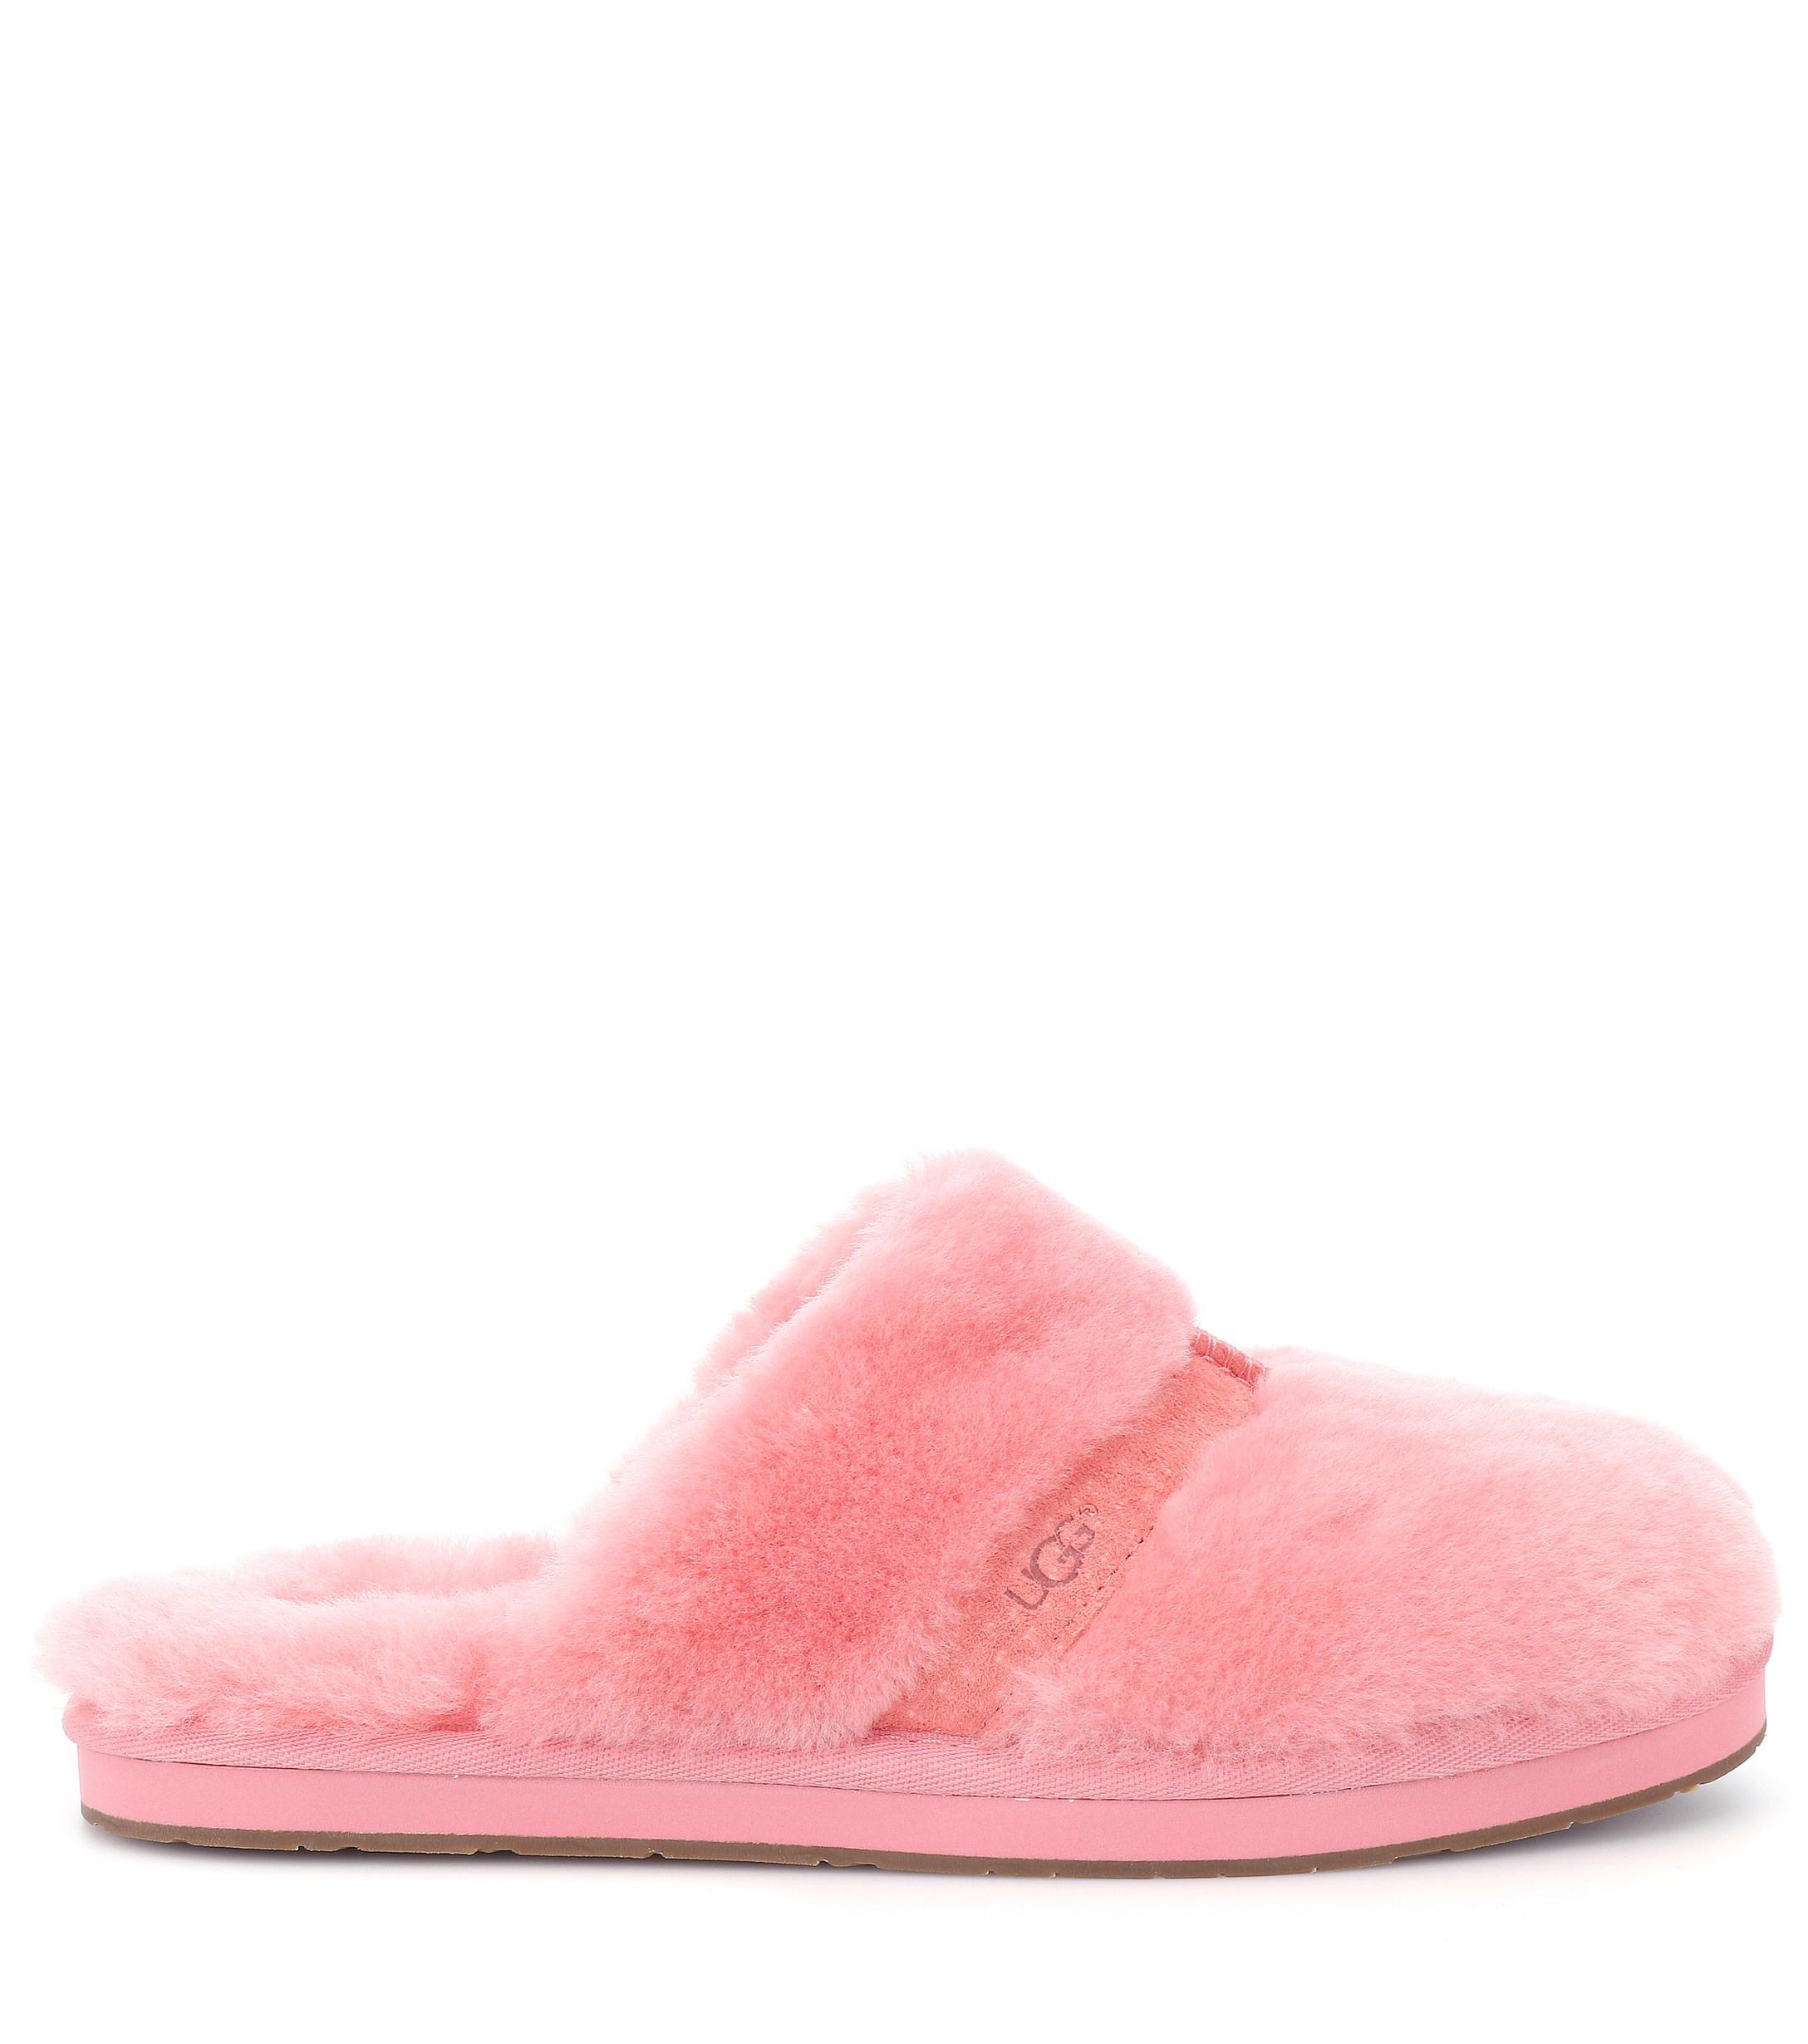 UGG Dalla Fur Slippers in Pink - Lyst